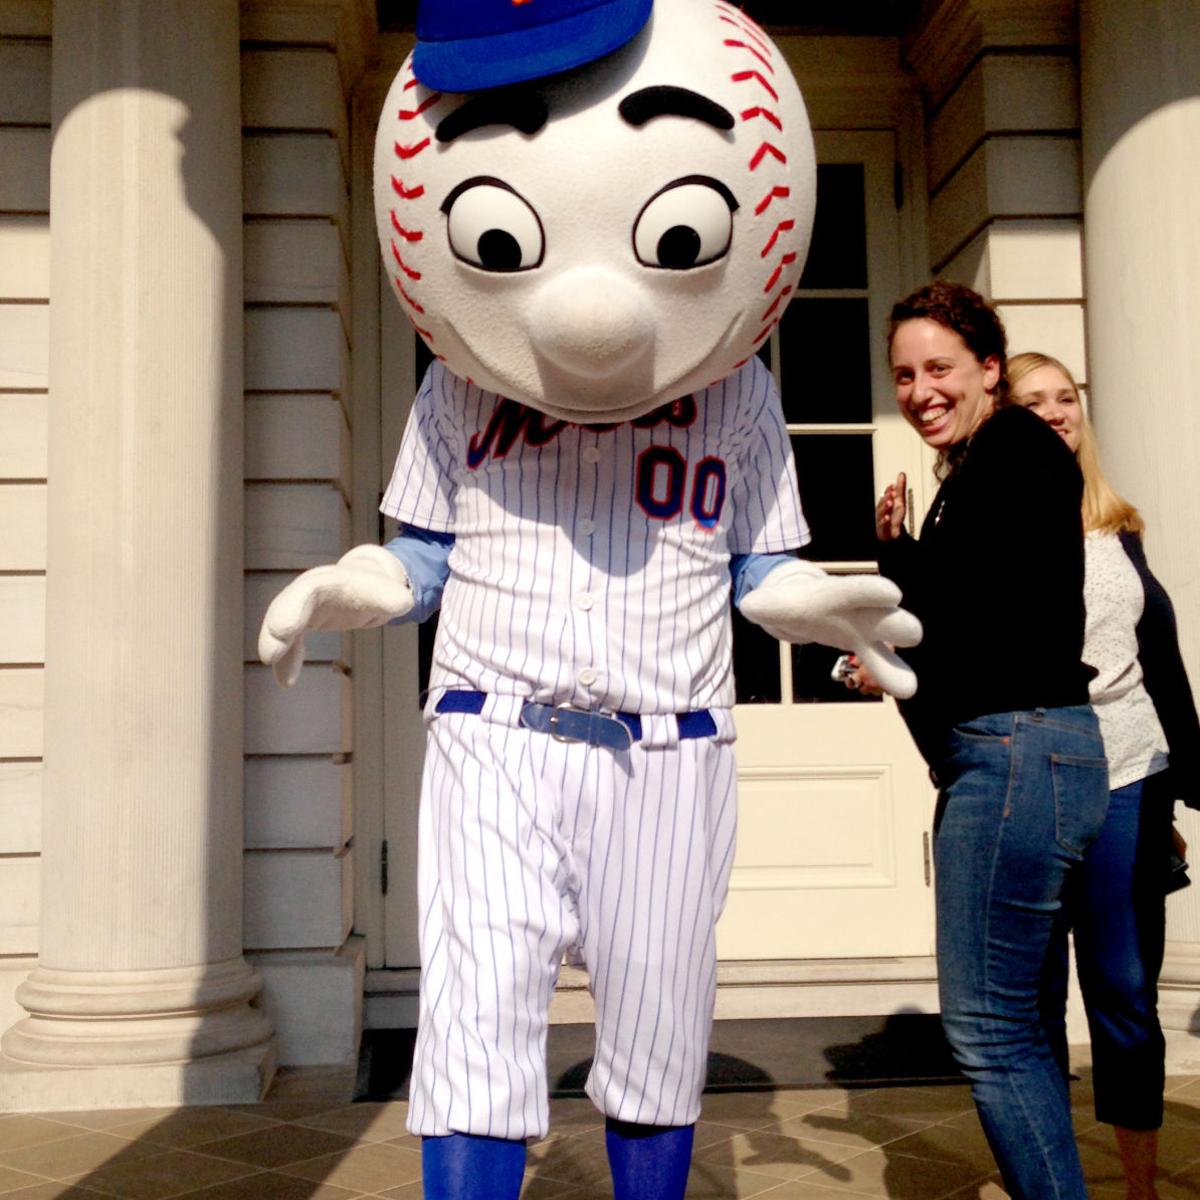 Mr Met gives fan the finger, employee out as team mascot, Sports